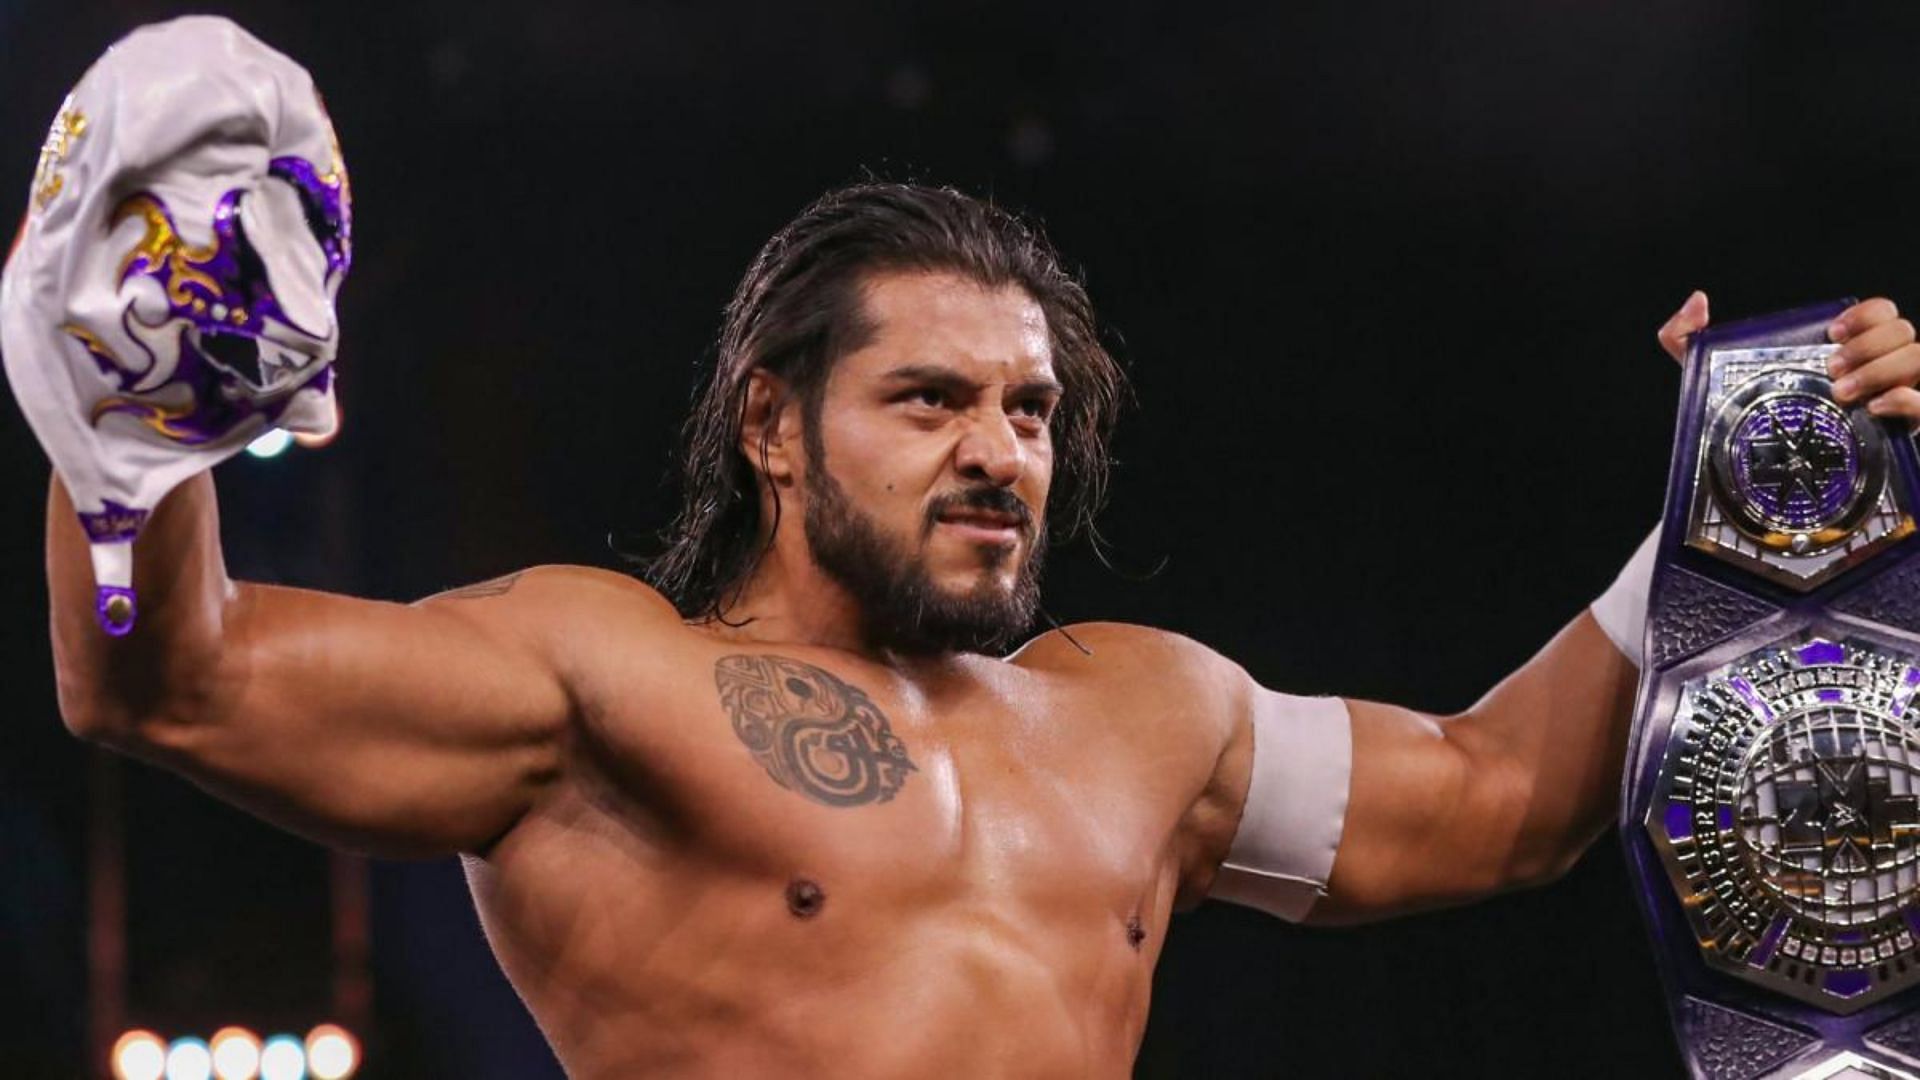 Santos Escobar faced many challenges when arrived in WWE.